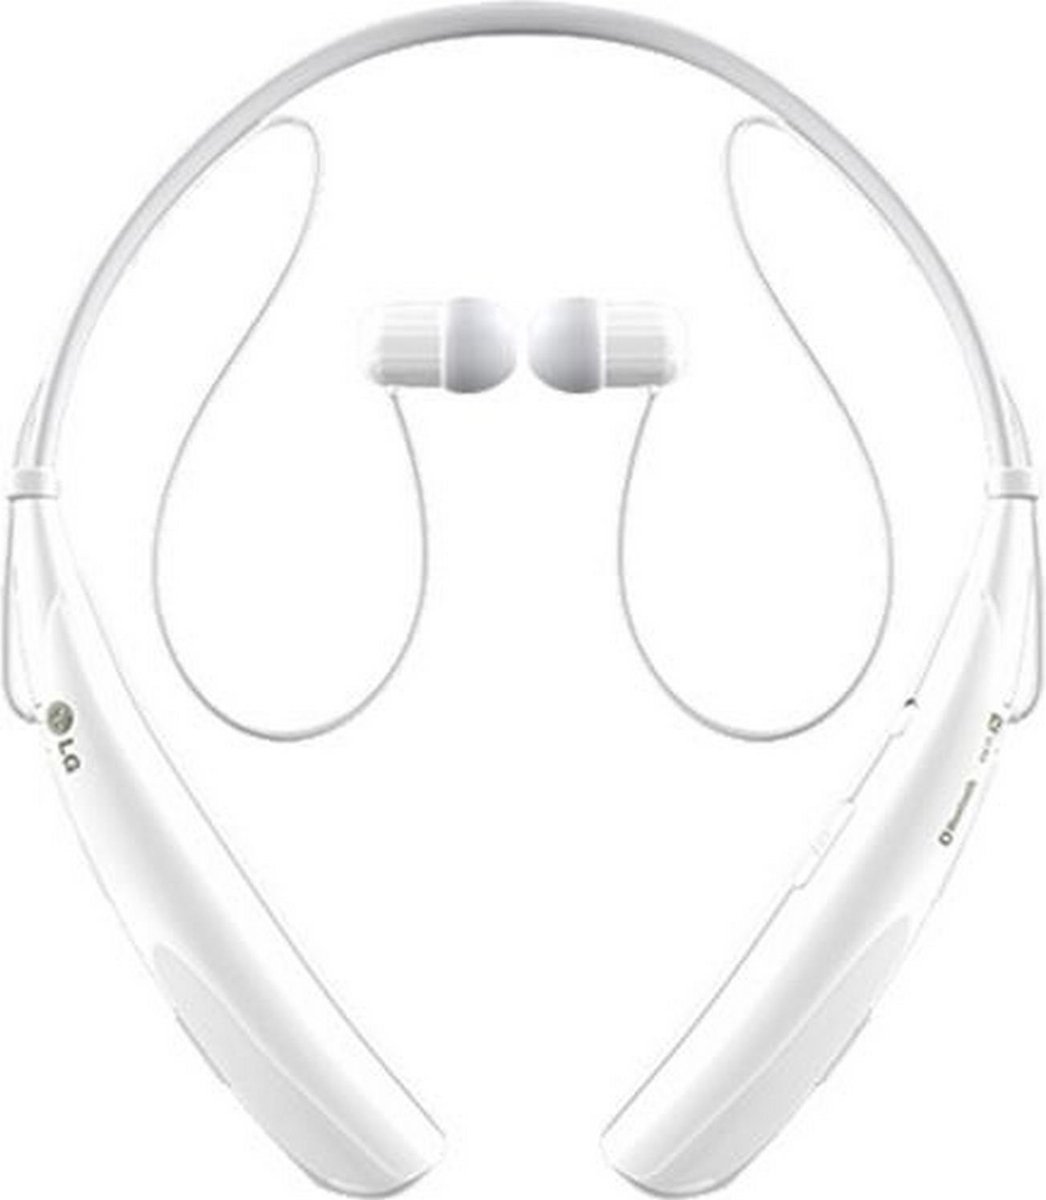 LG Bluetooth Stereo Headset HBS-750 Tone Pro - Wit